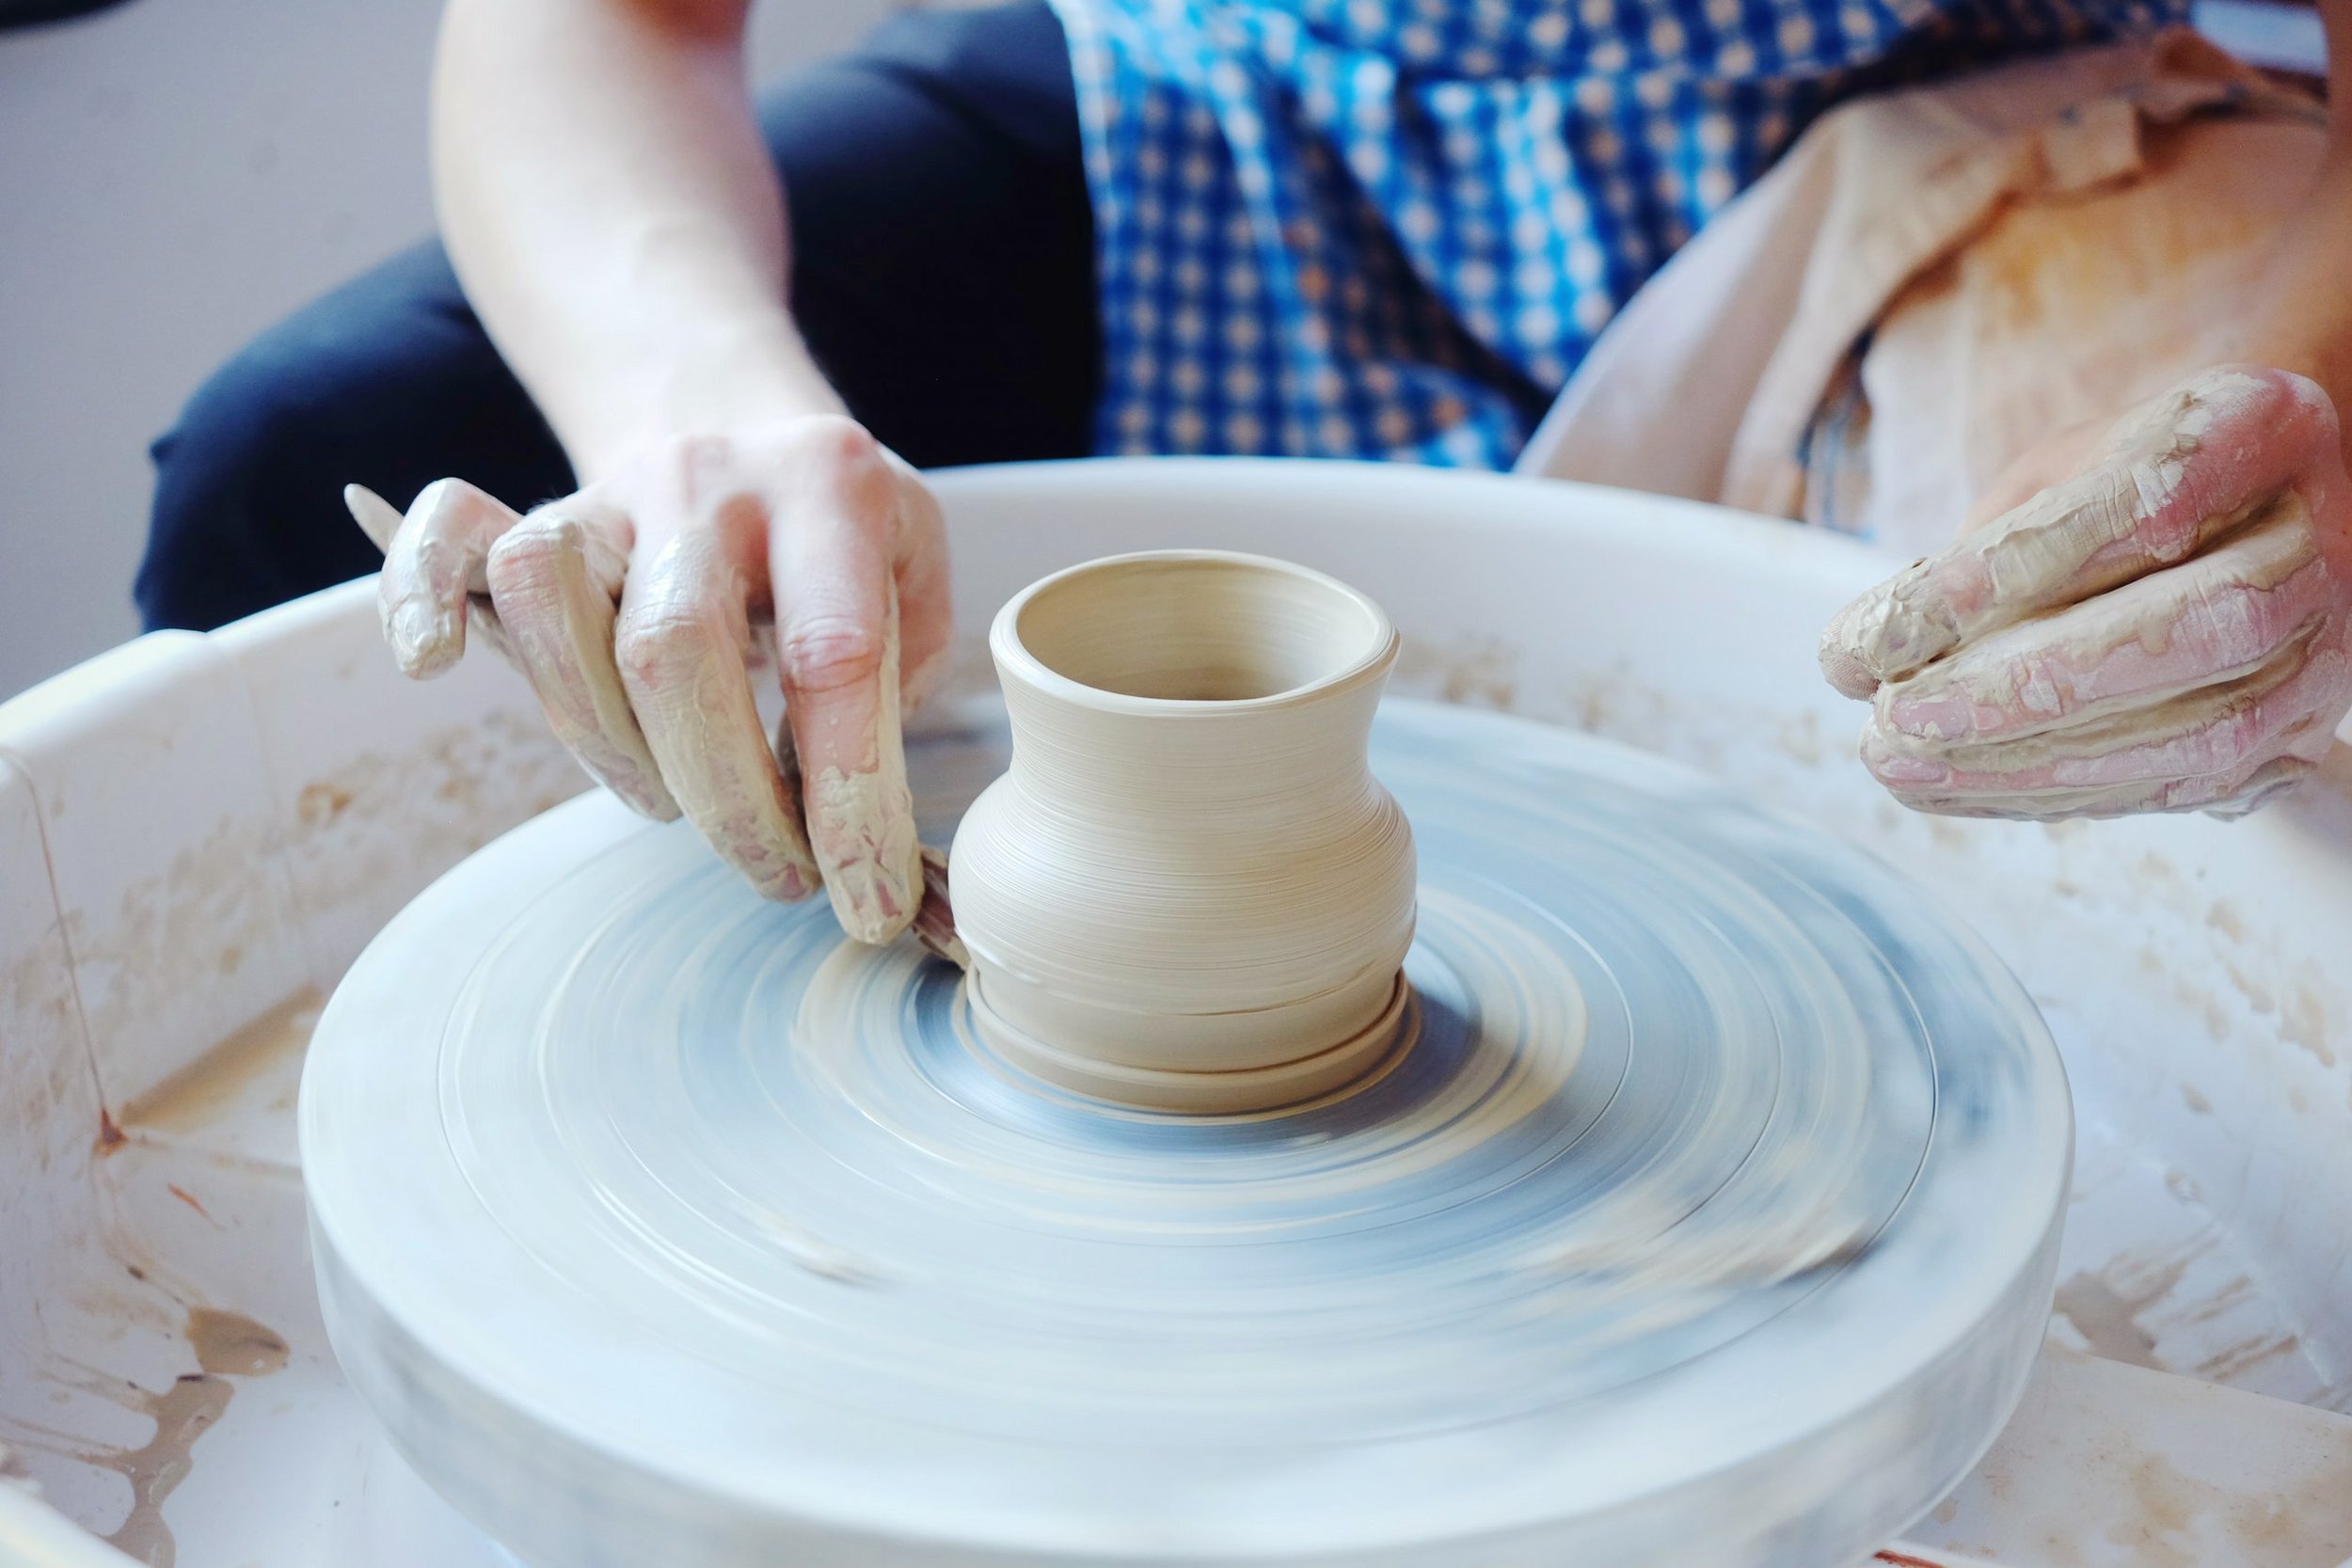 Fun facts about pottery and ceramics